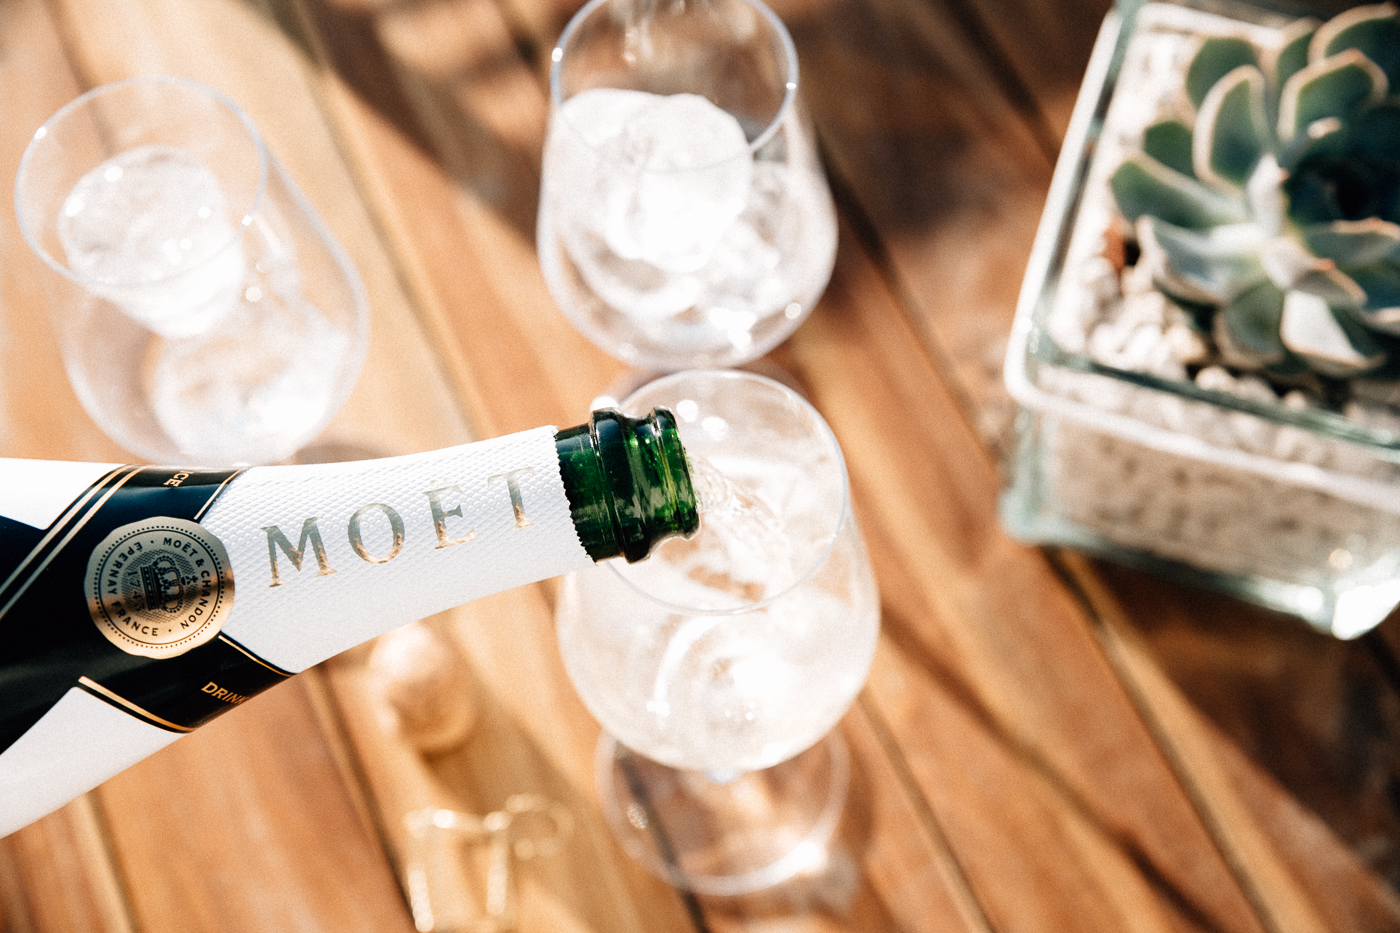 Moet Chandon Ice Imperial - Best Served on Ice | Bikinis & Passports